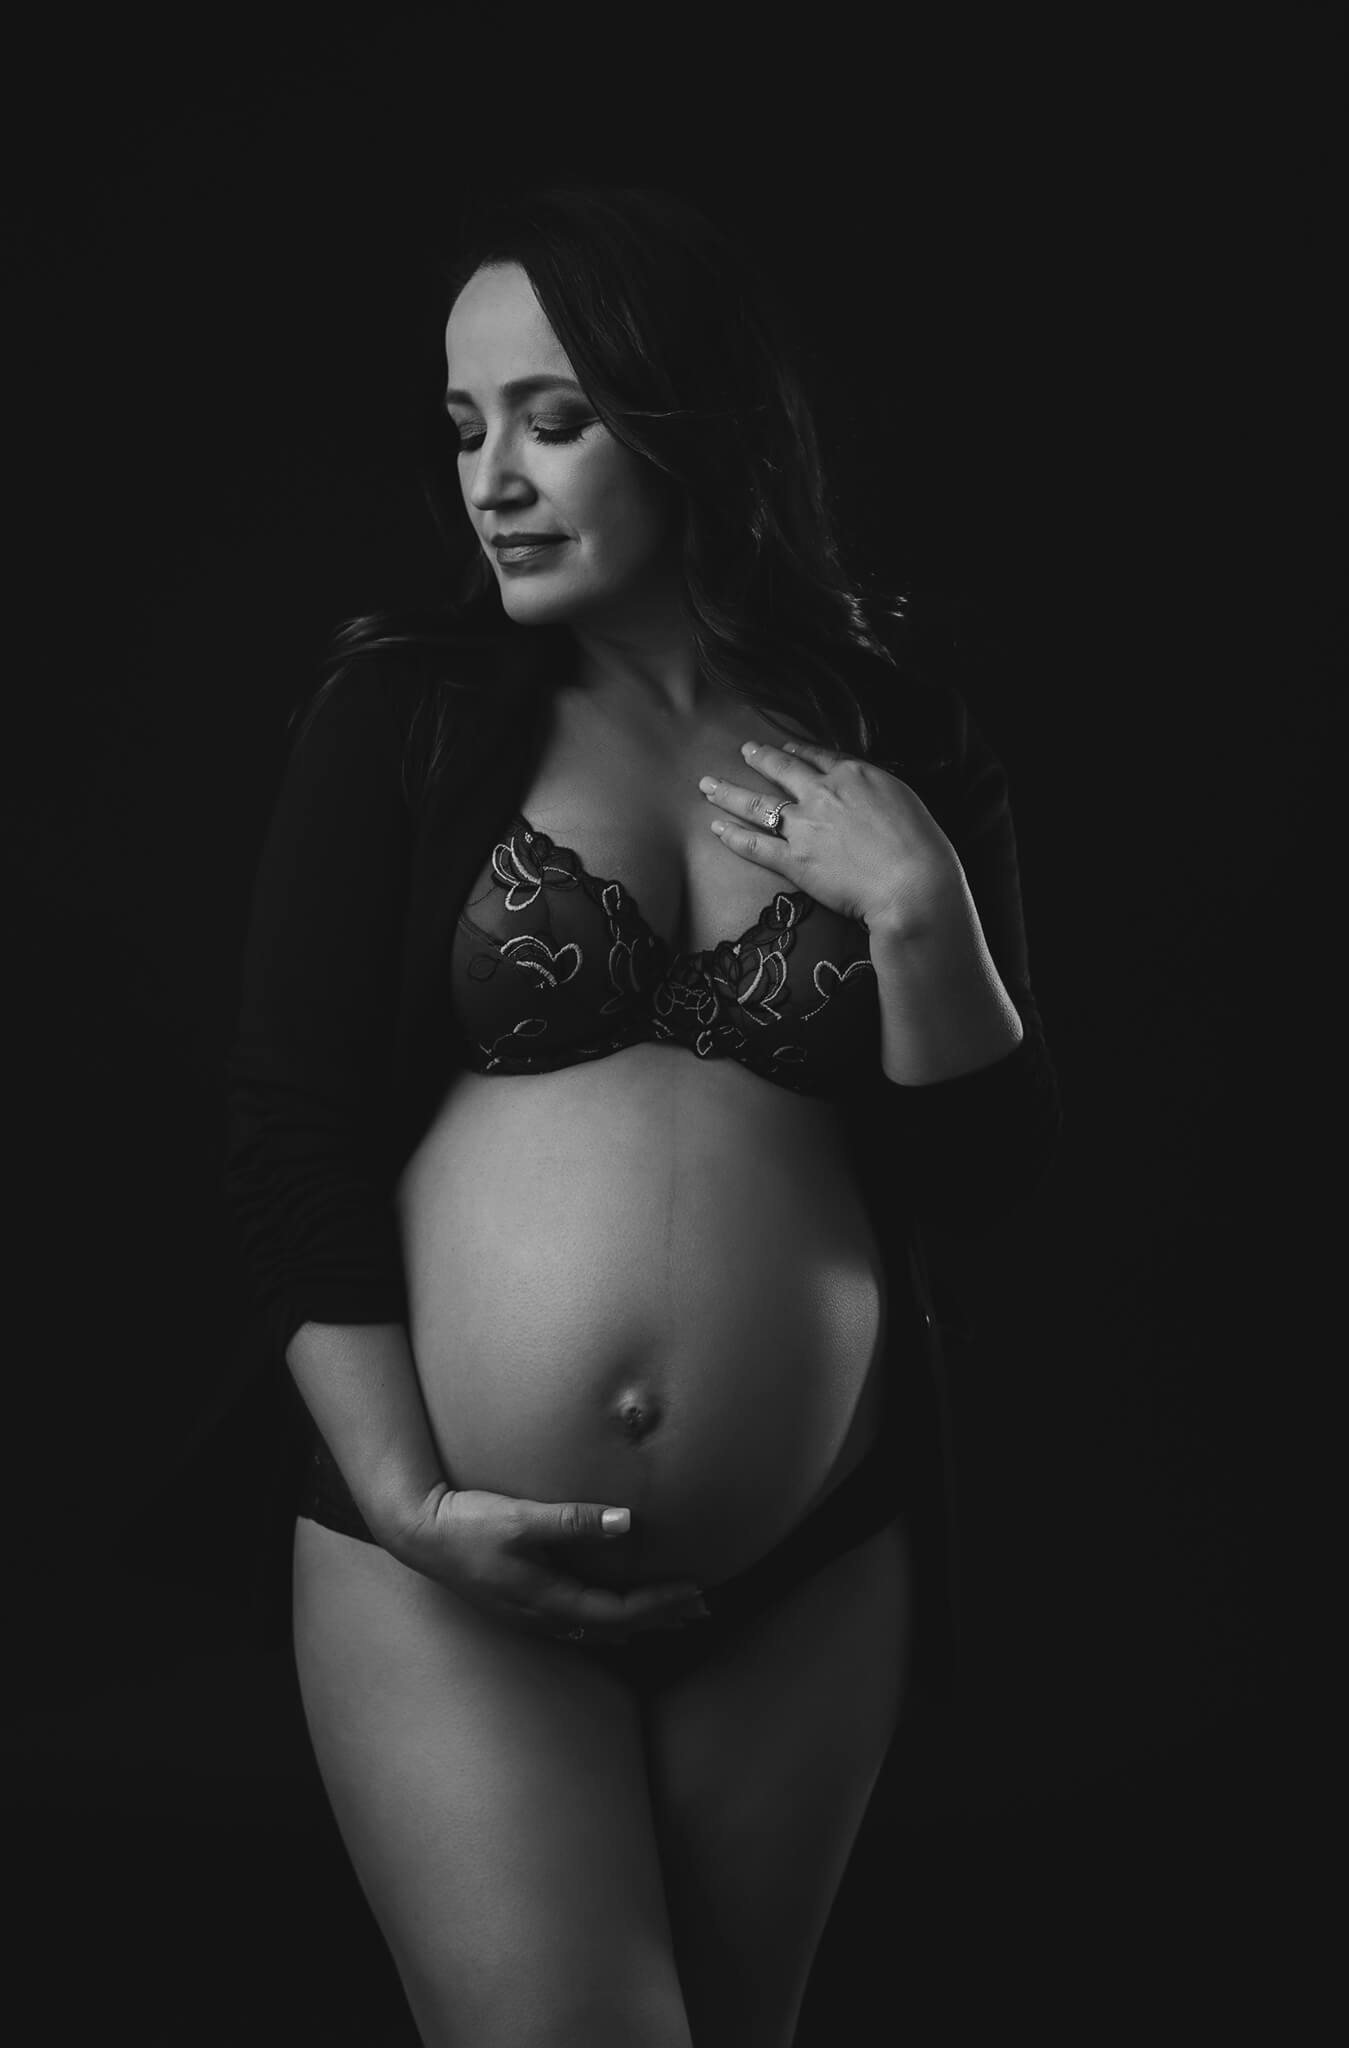 expectant mama is wearing lingerie and posing in a romantic way for a maternity photography session in black and white